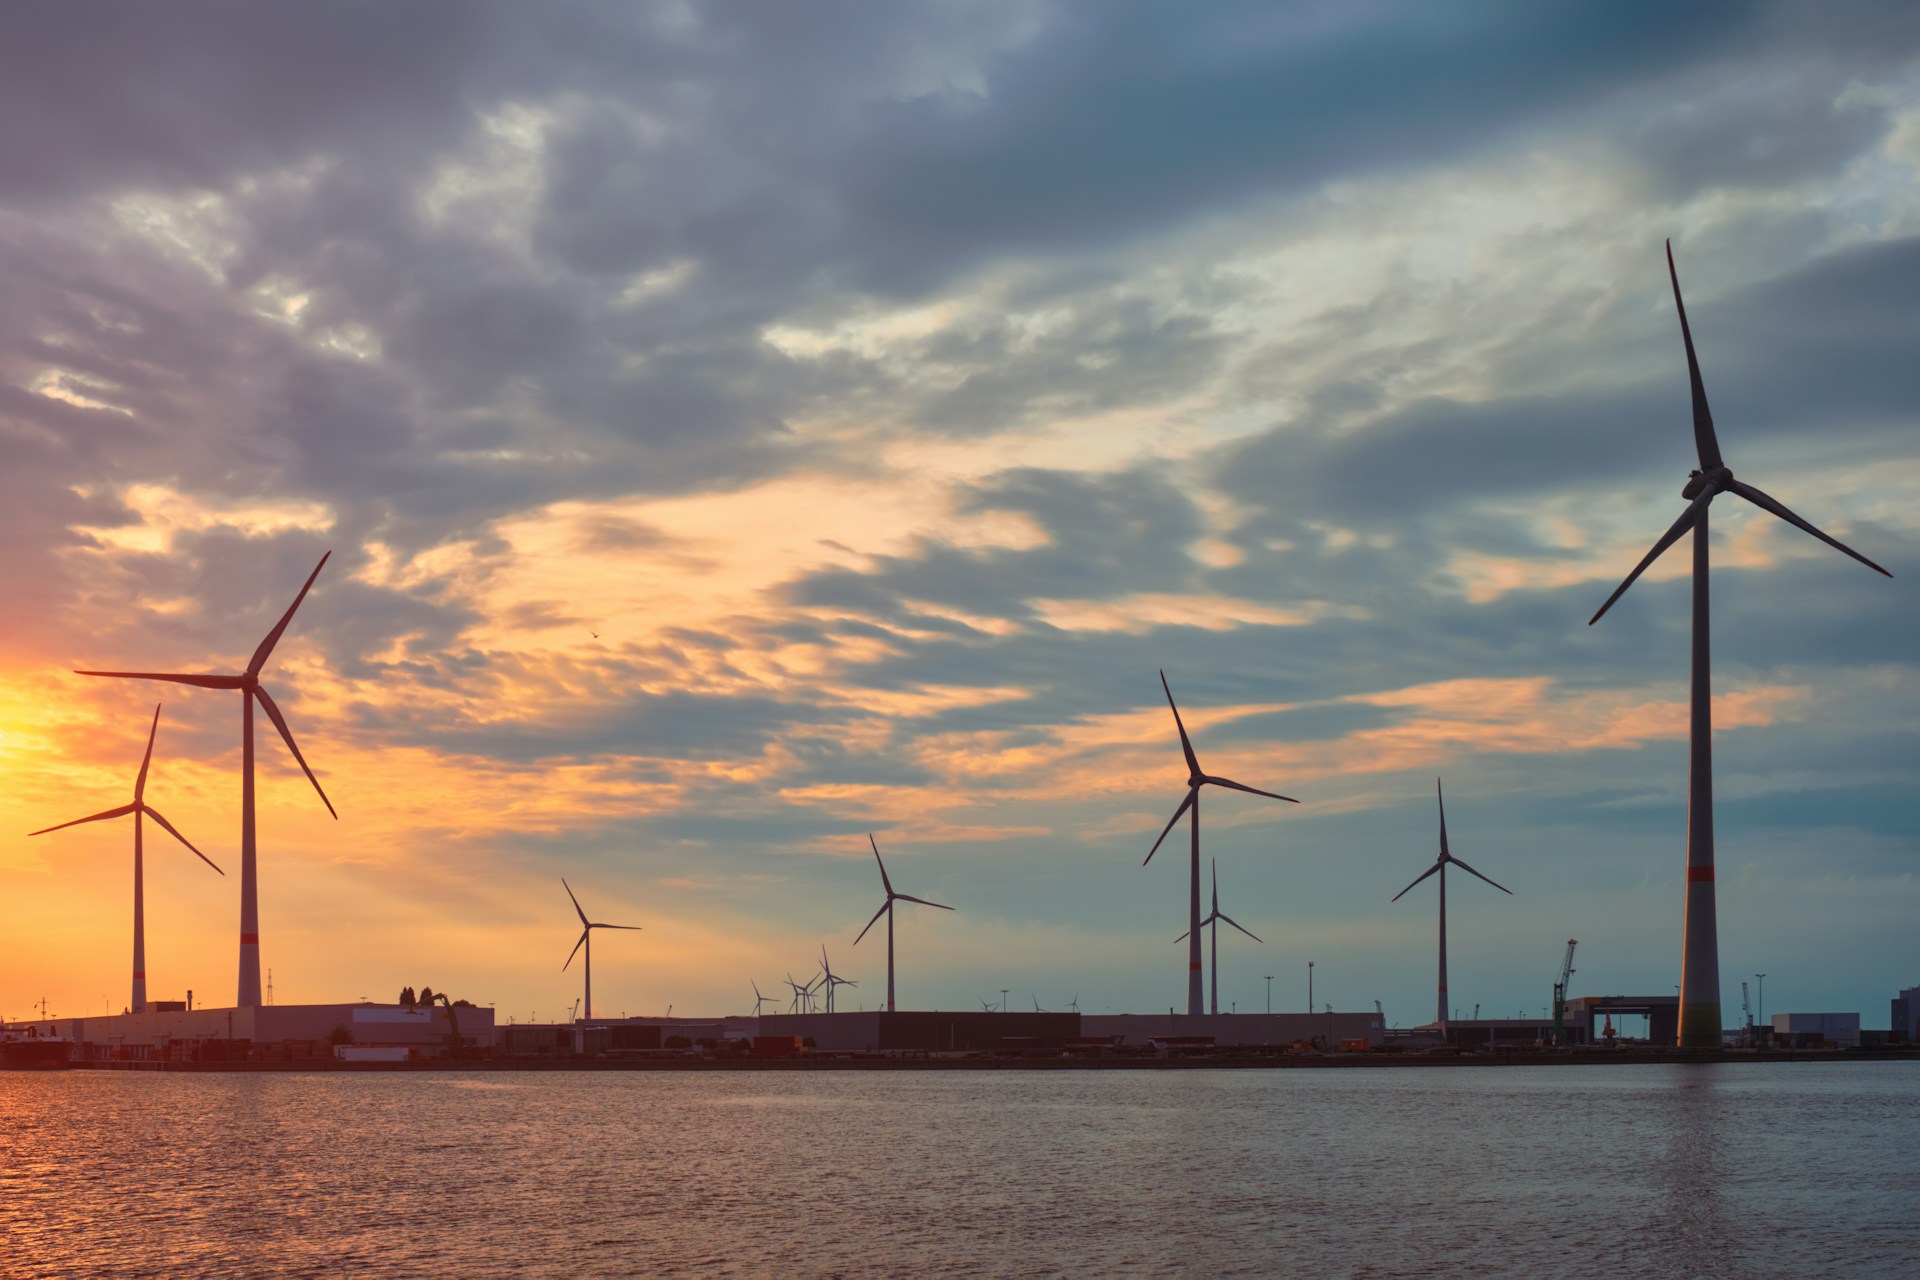 Wind farm at the port of Antwerp at sunset